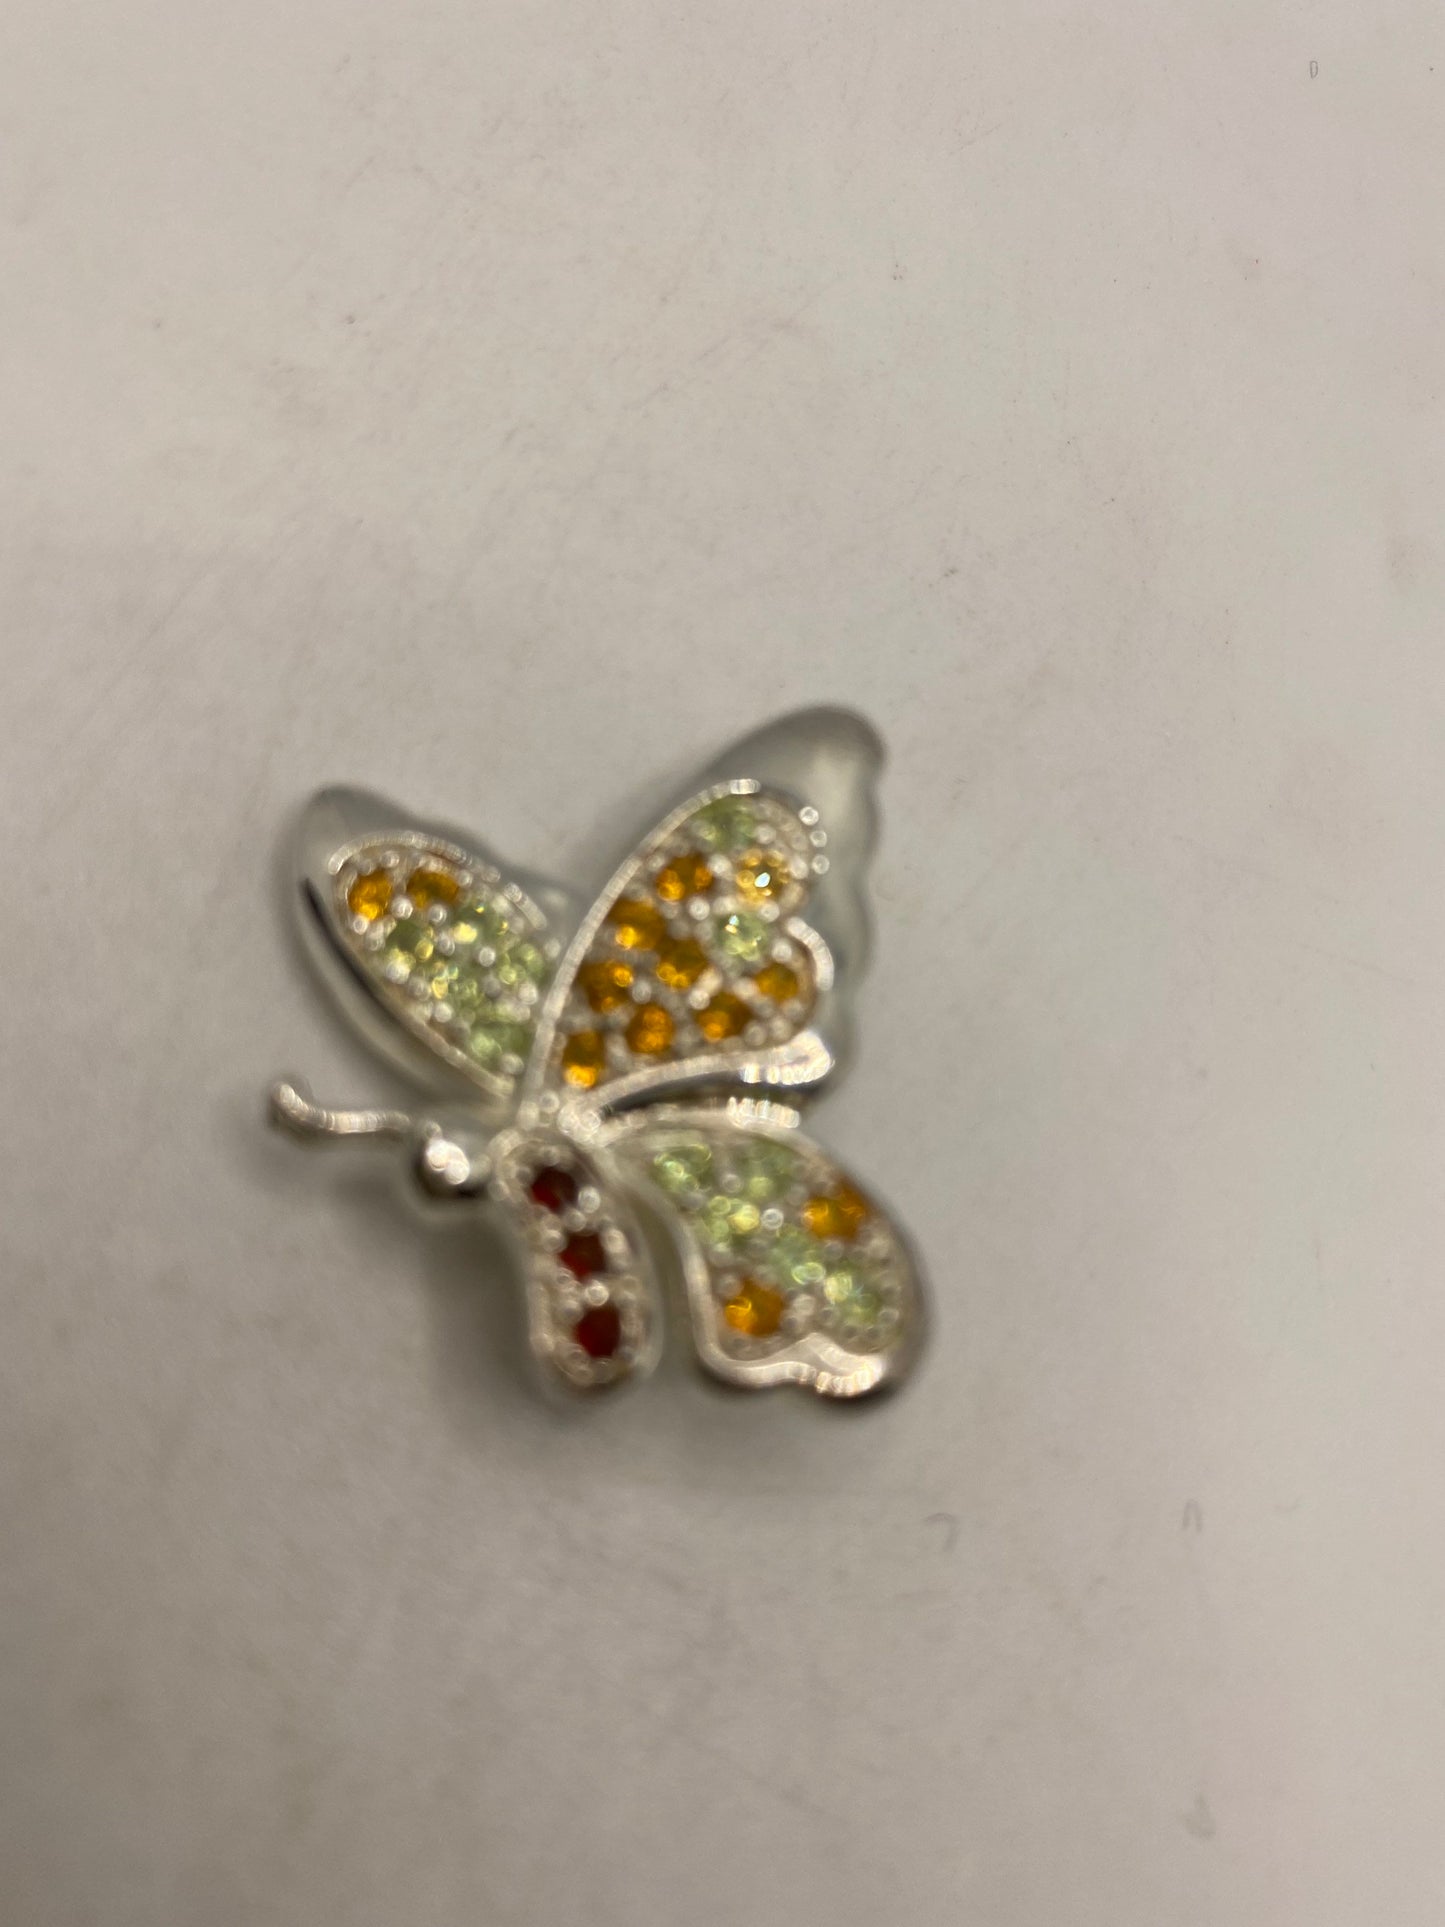 Vintage Citrine Peridot and Garnet pin 925 Sterling Silver Butterfly Brooch